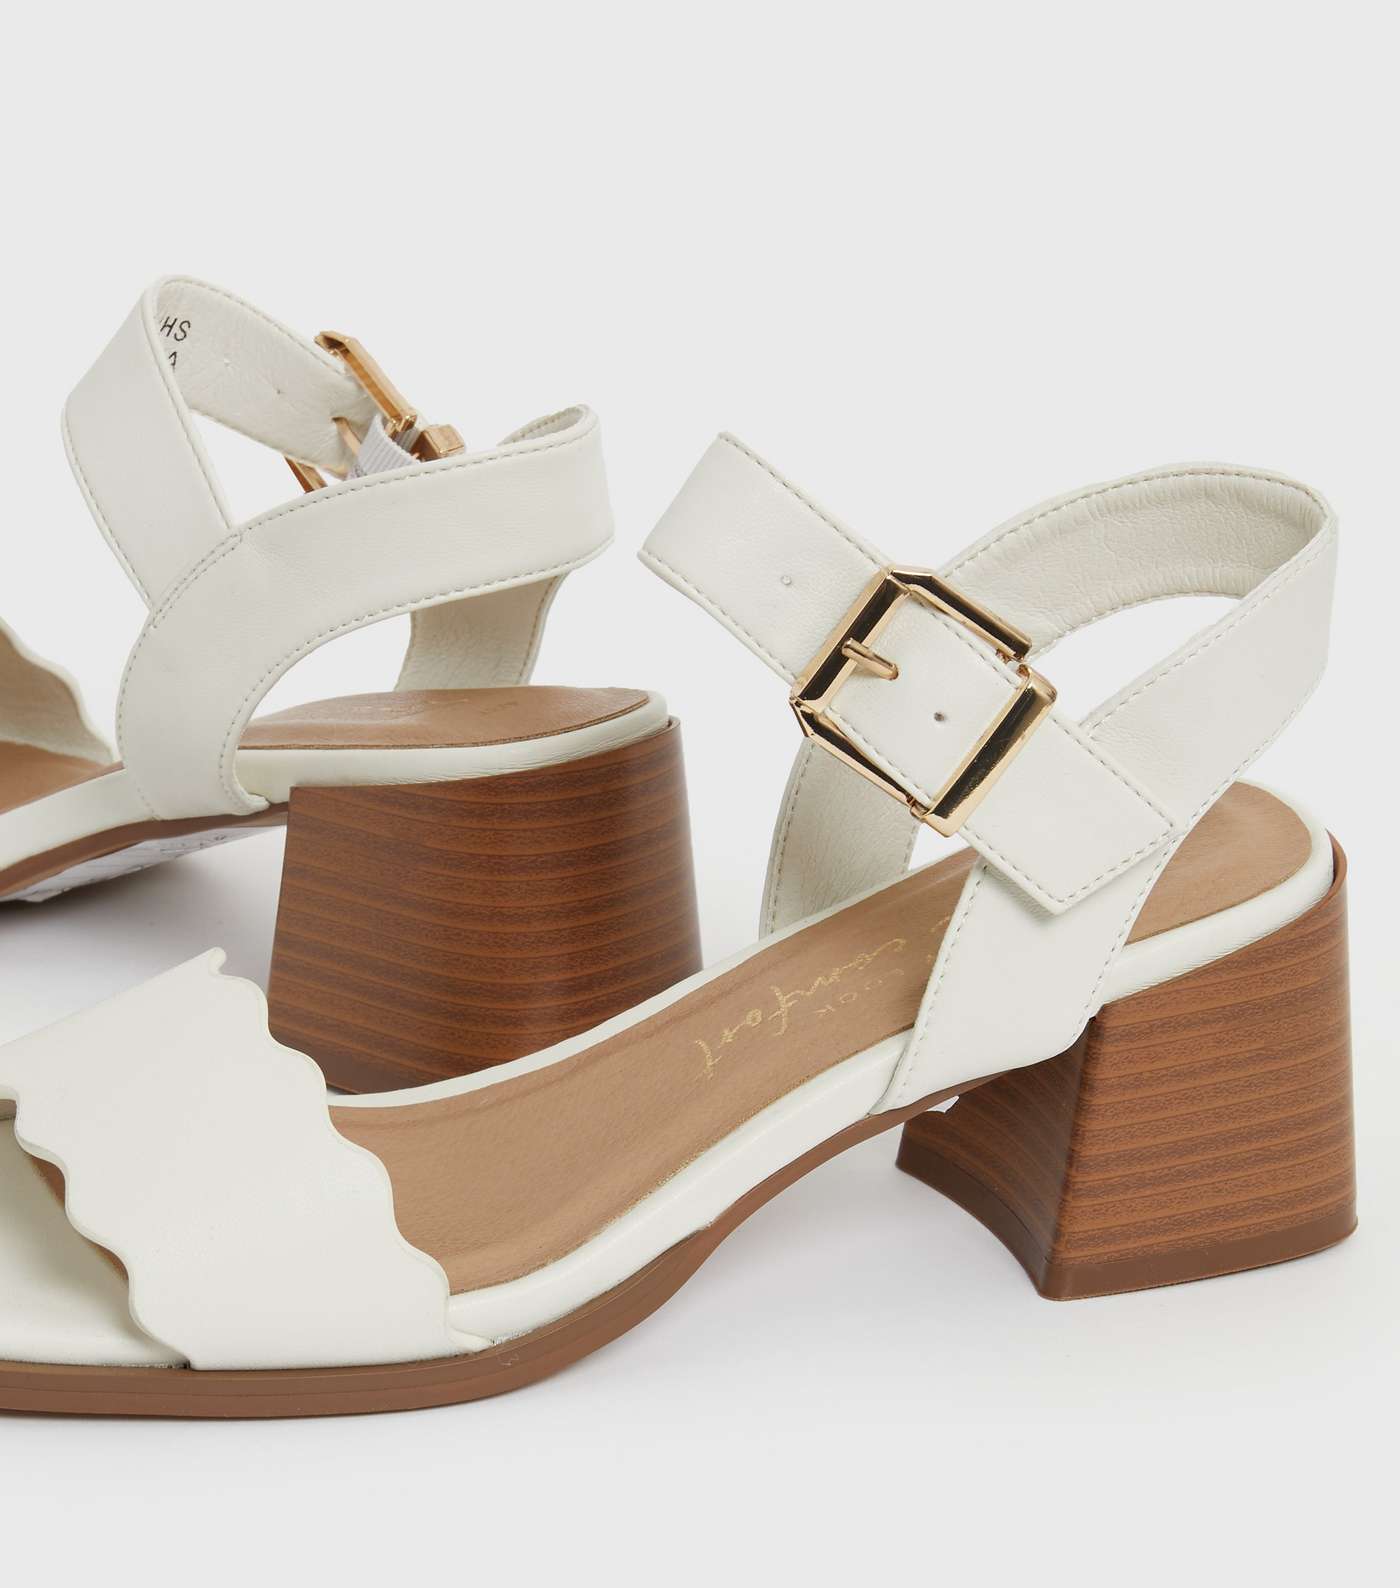 Off White Leather-Look Scalloped 2 Part Block Heel Sandals Image 4